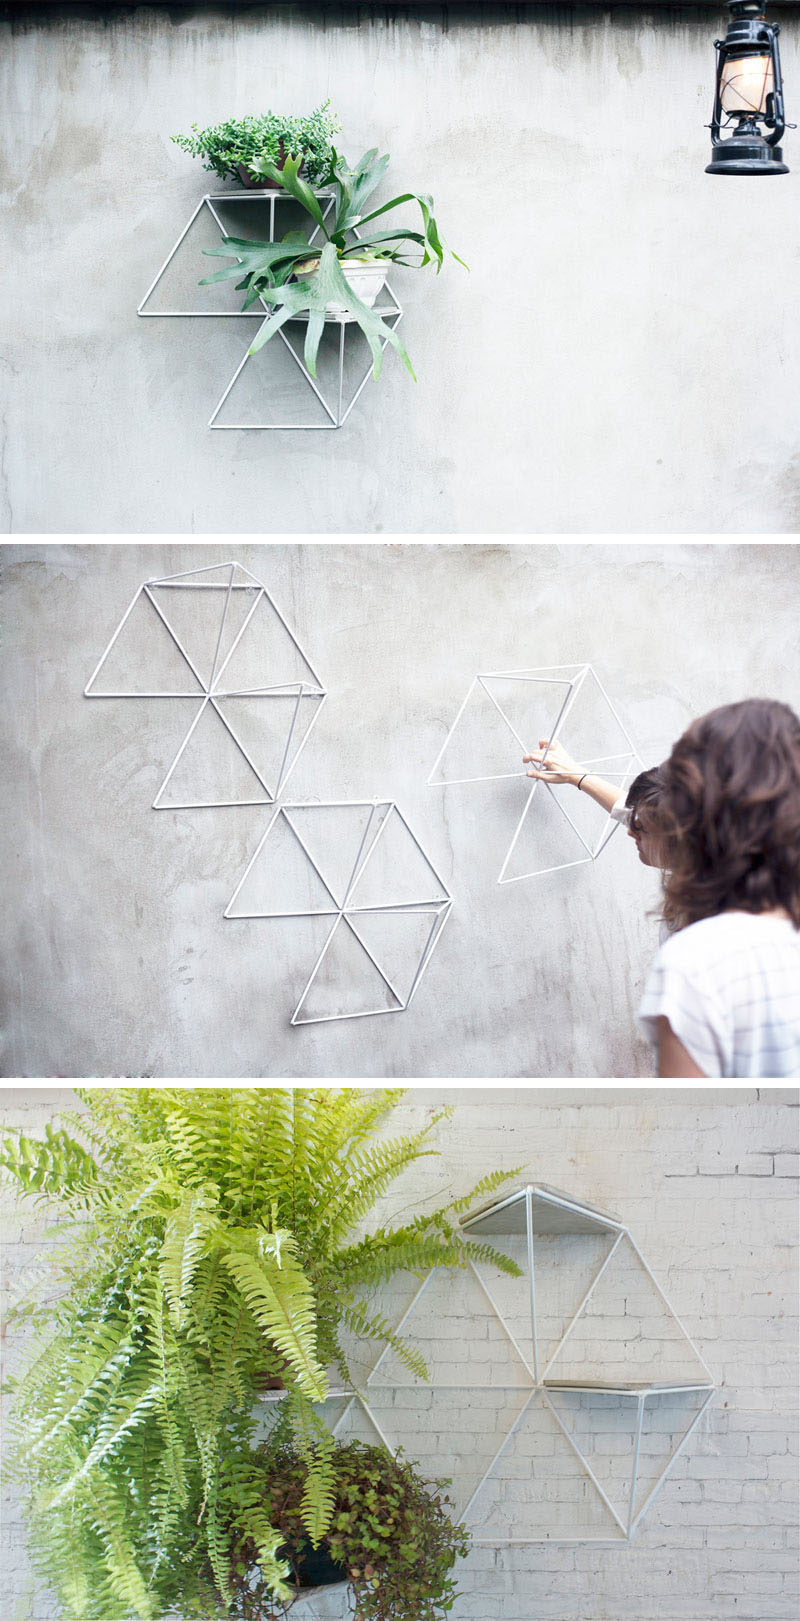 The modular geometric shelves are perfect for displaying your plants.